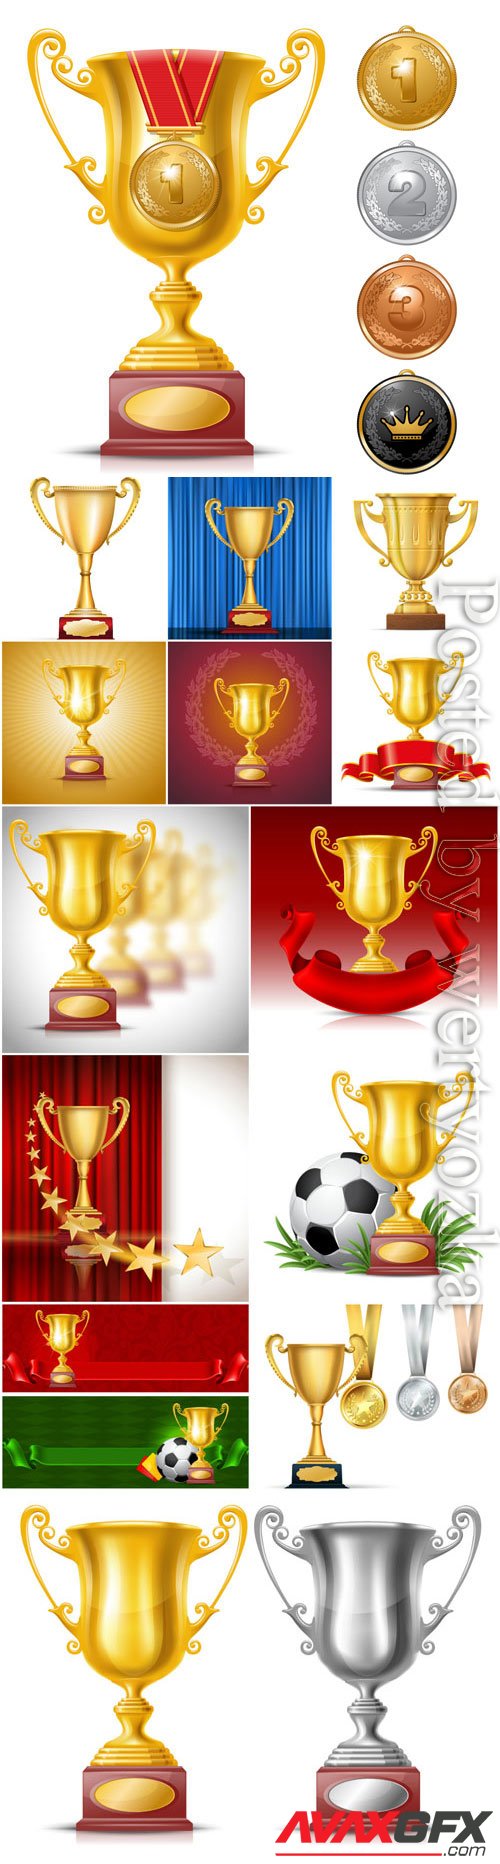 Cups and gold medals in vector